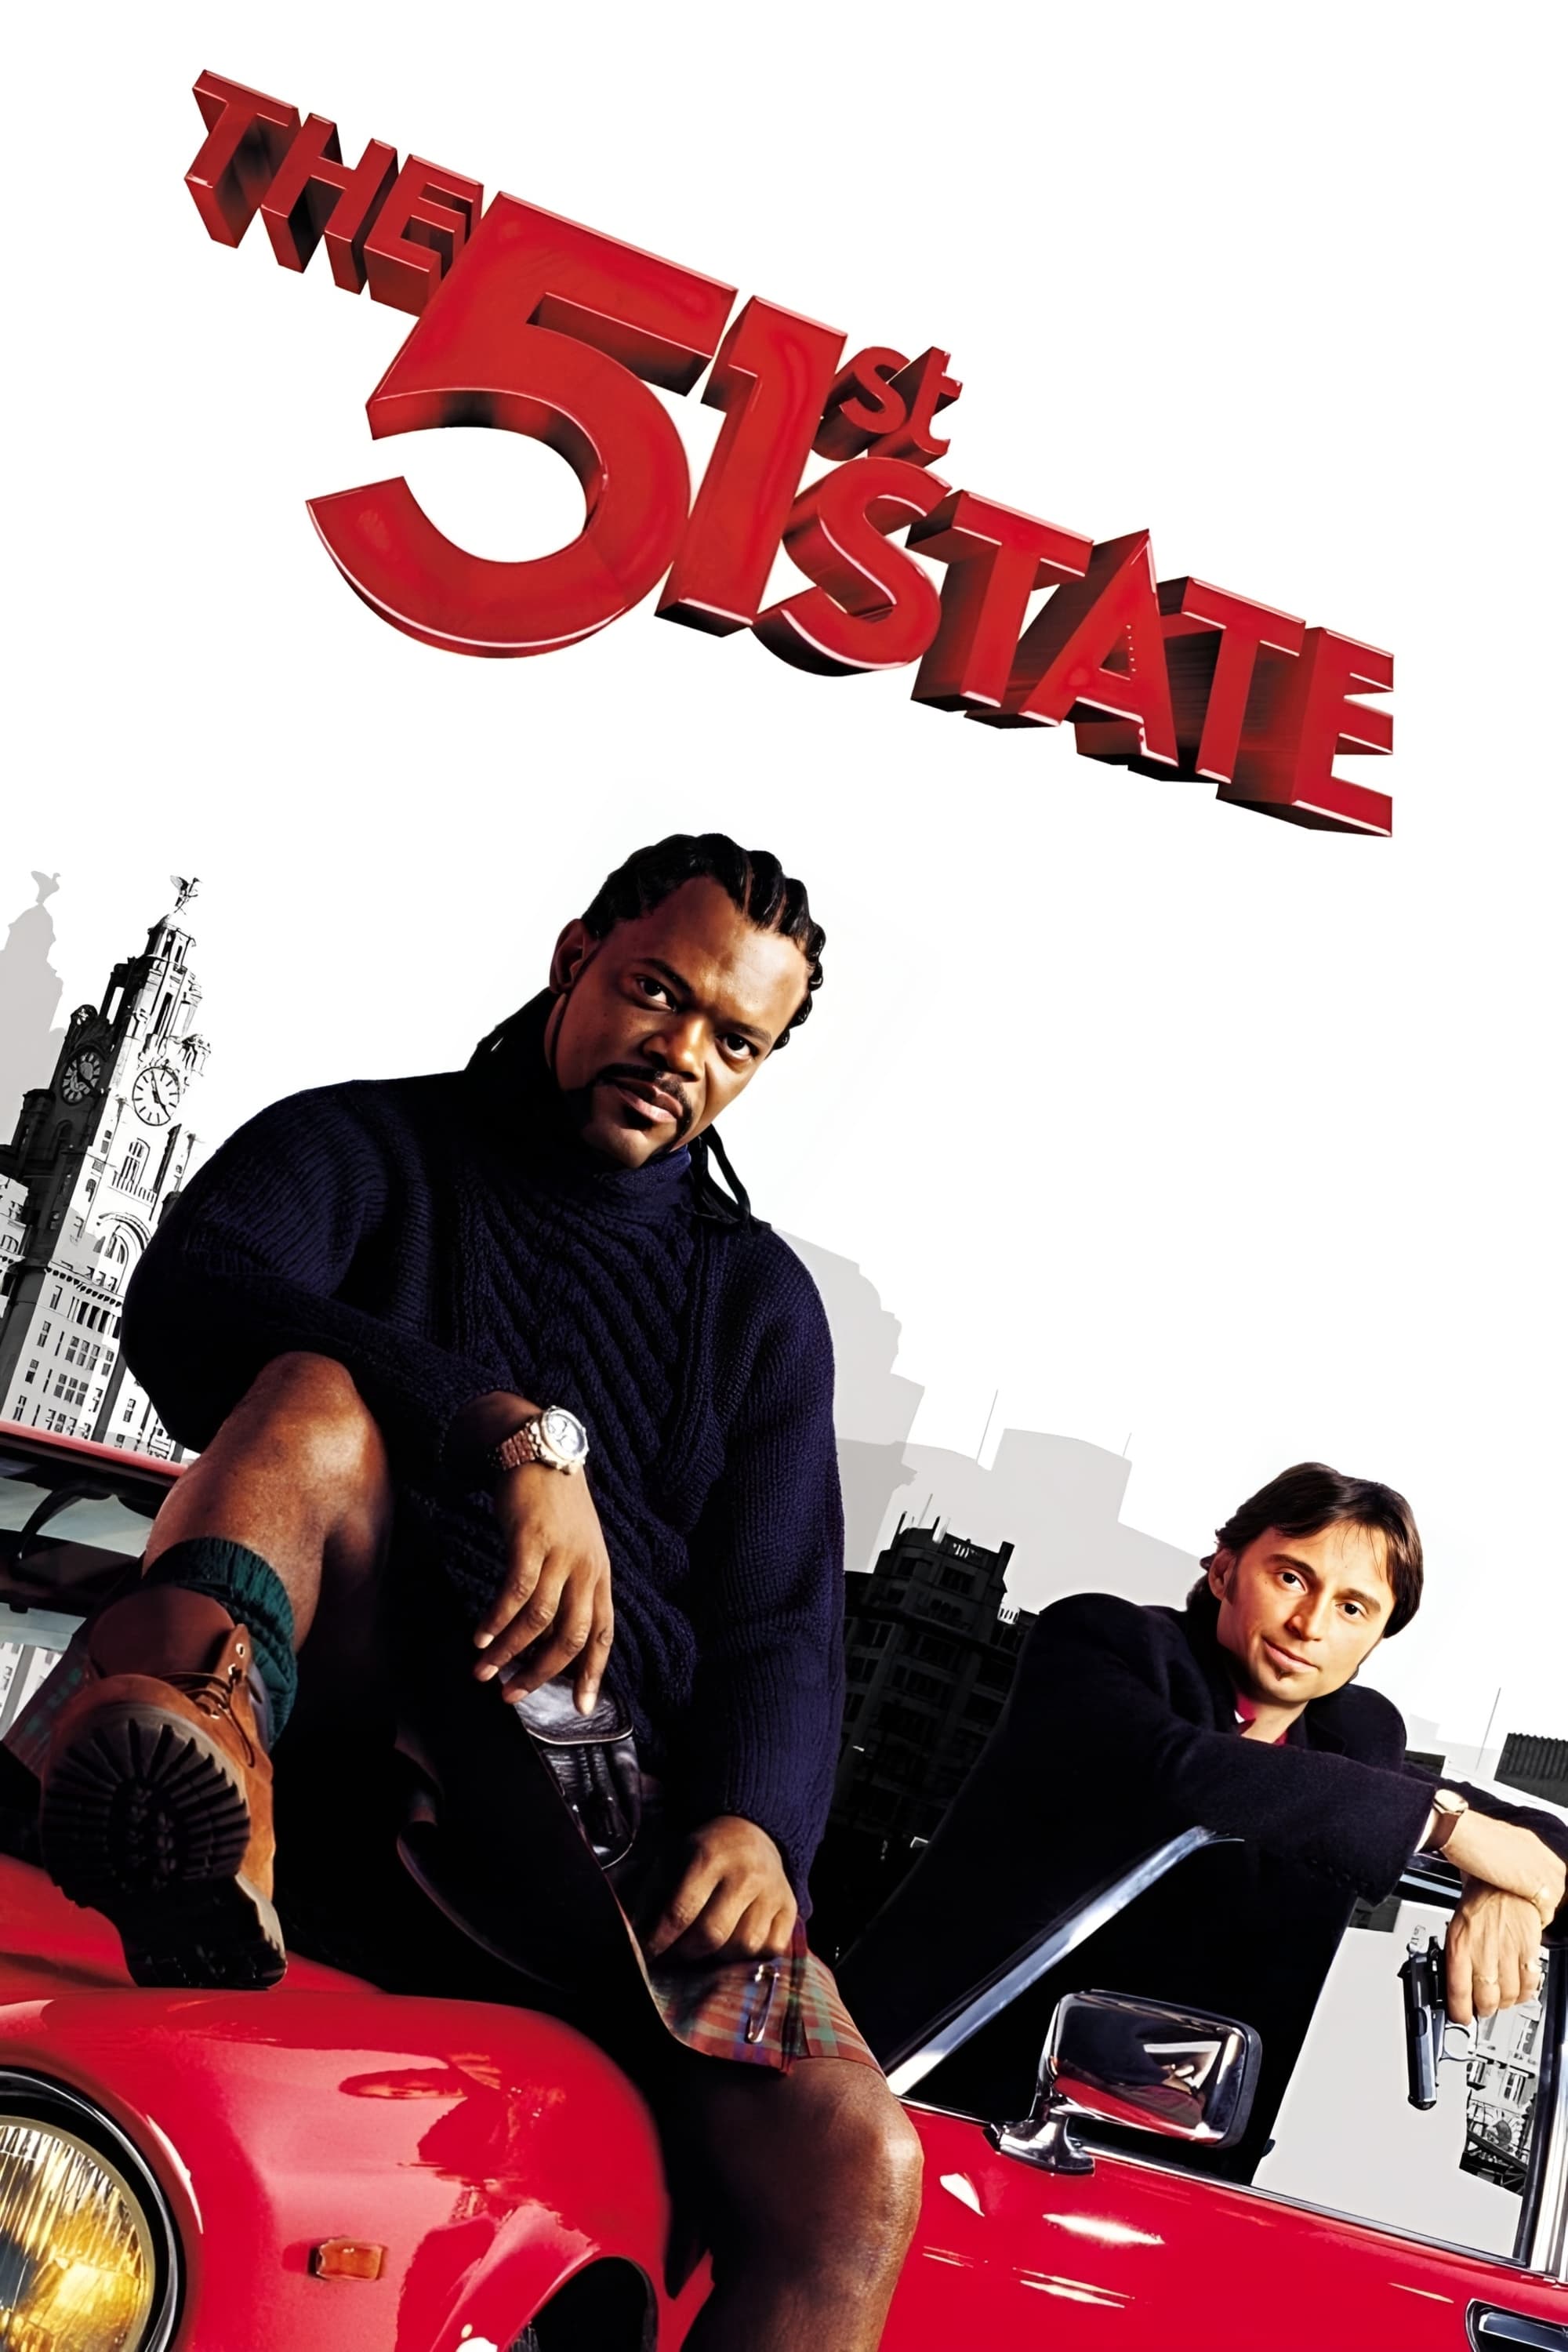 The 51st State (2001)